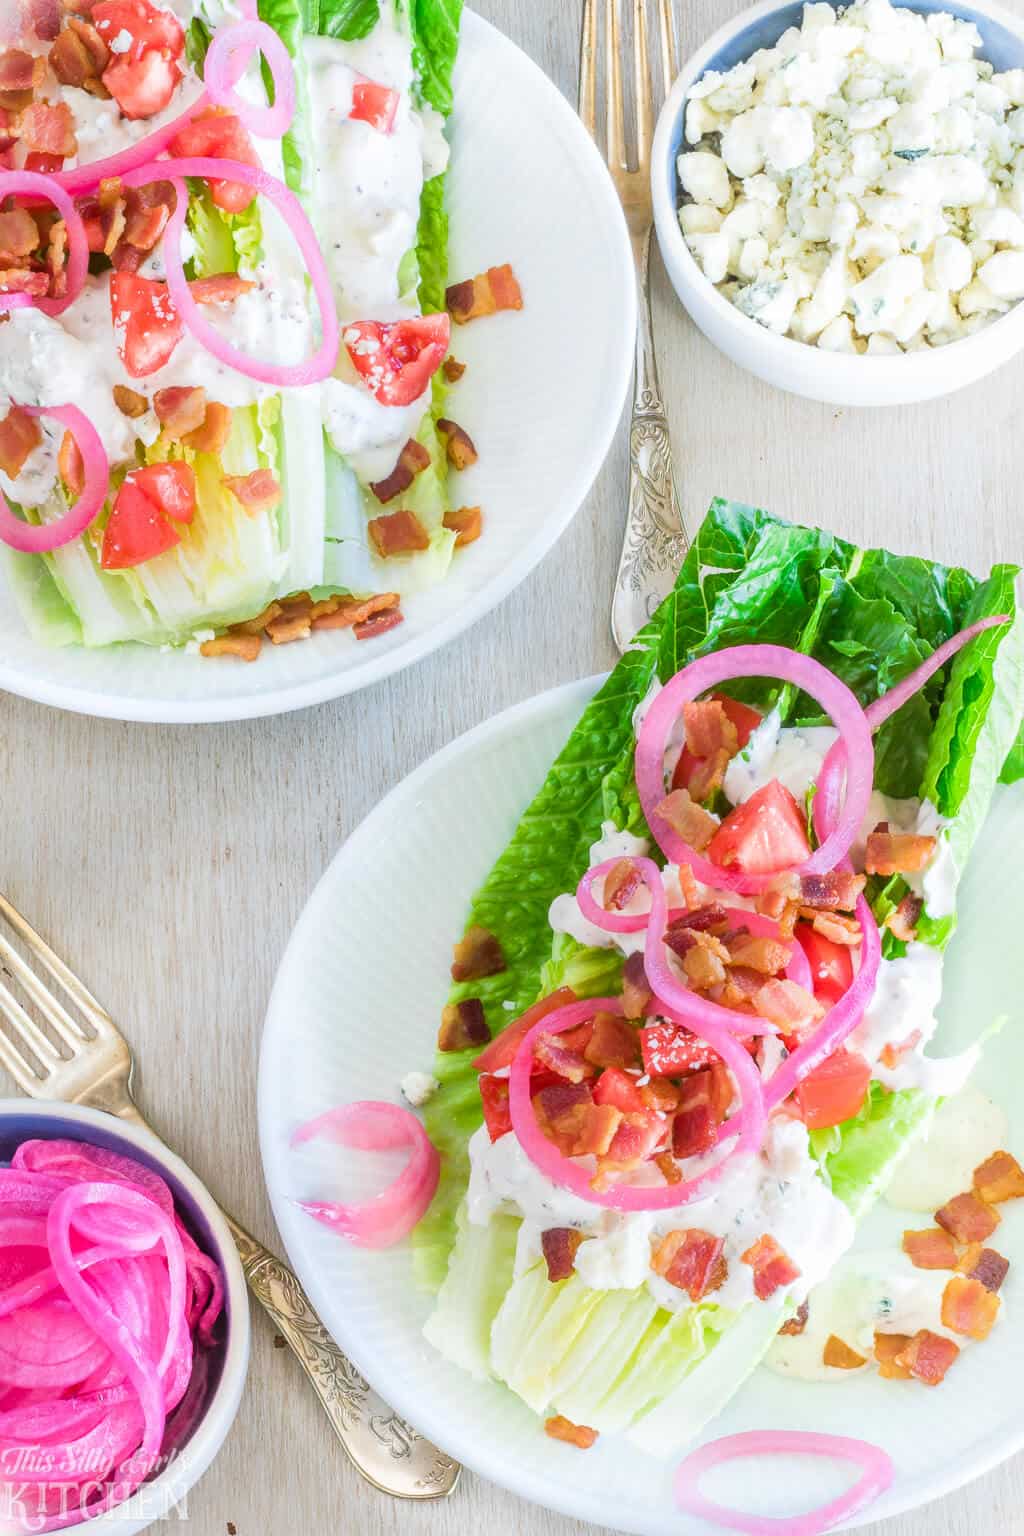 Two Wedge Salads on white plates overhead